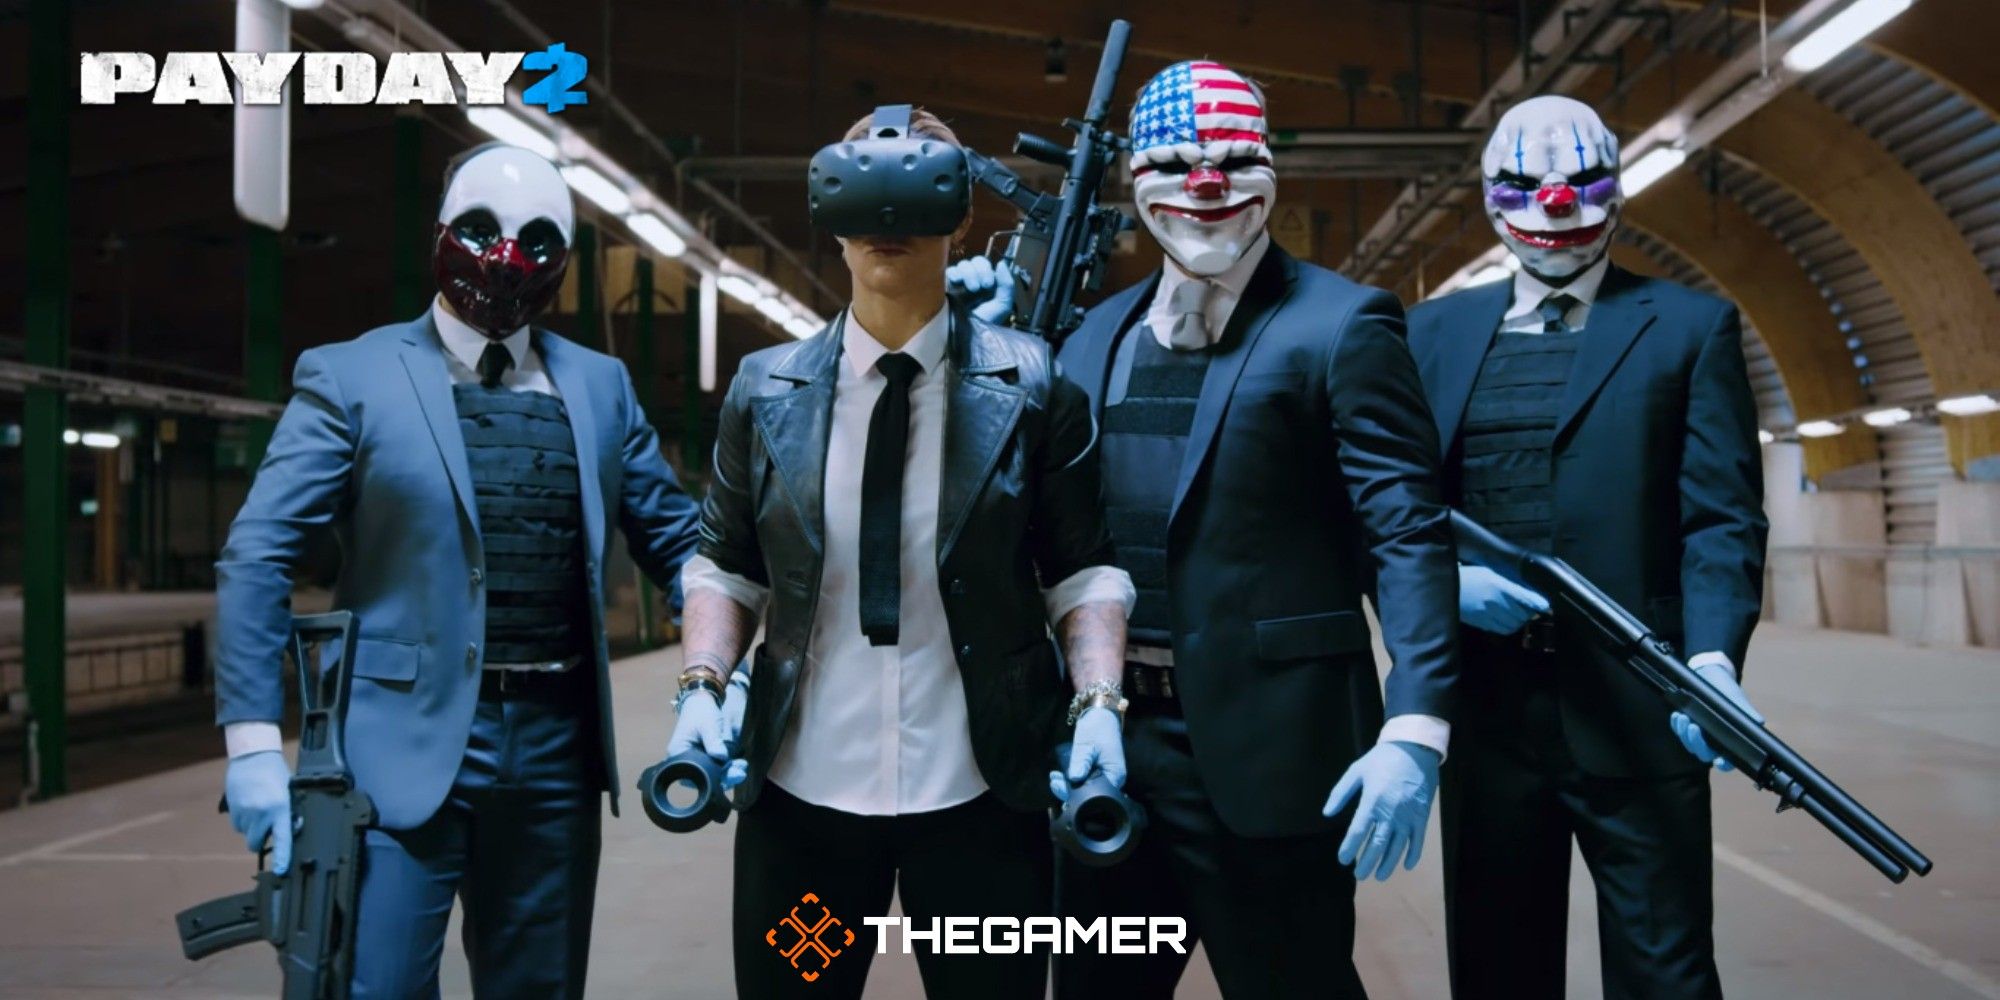 payday 2 vr not launching